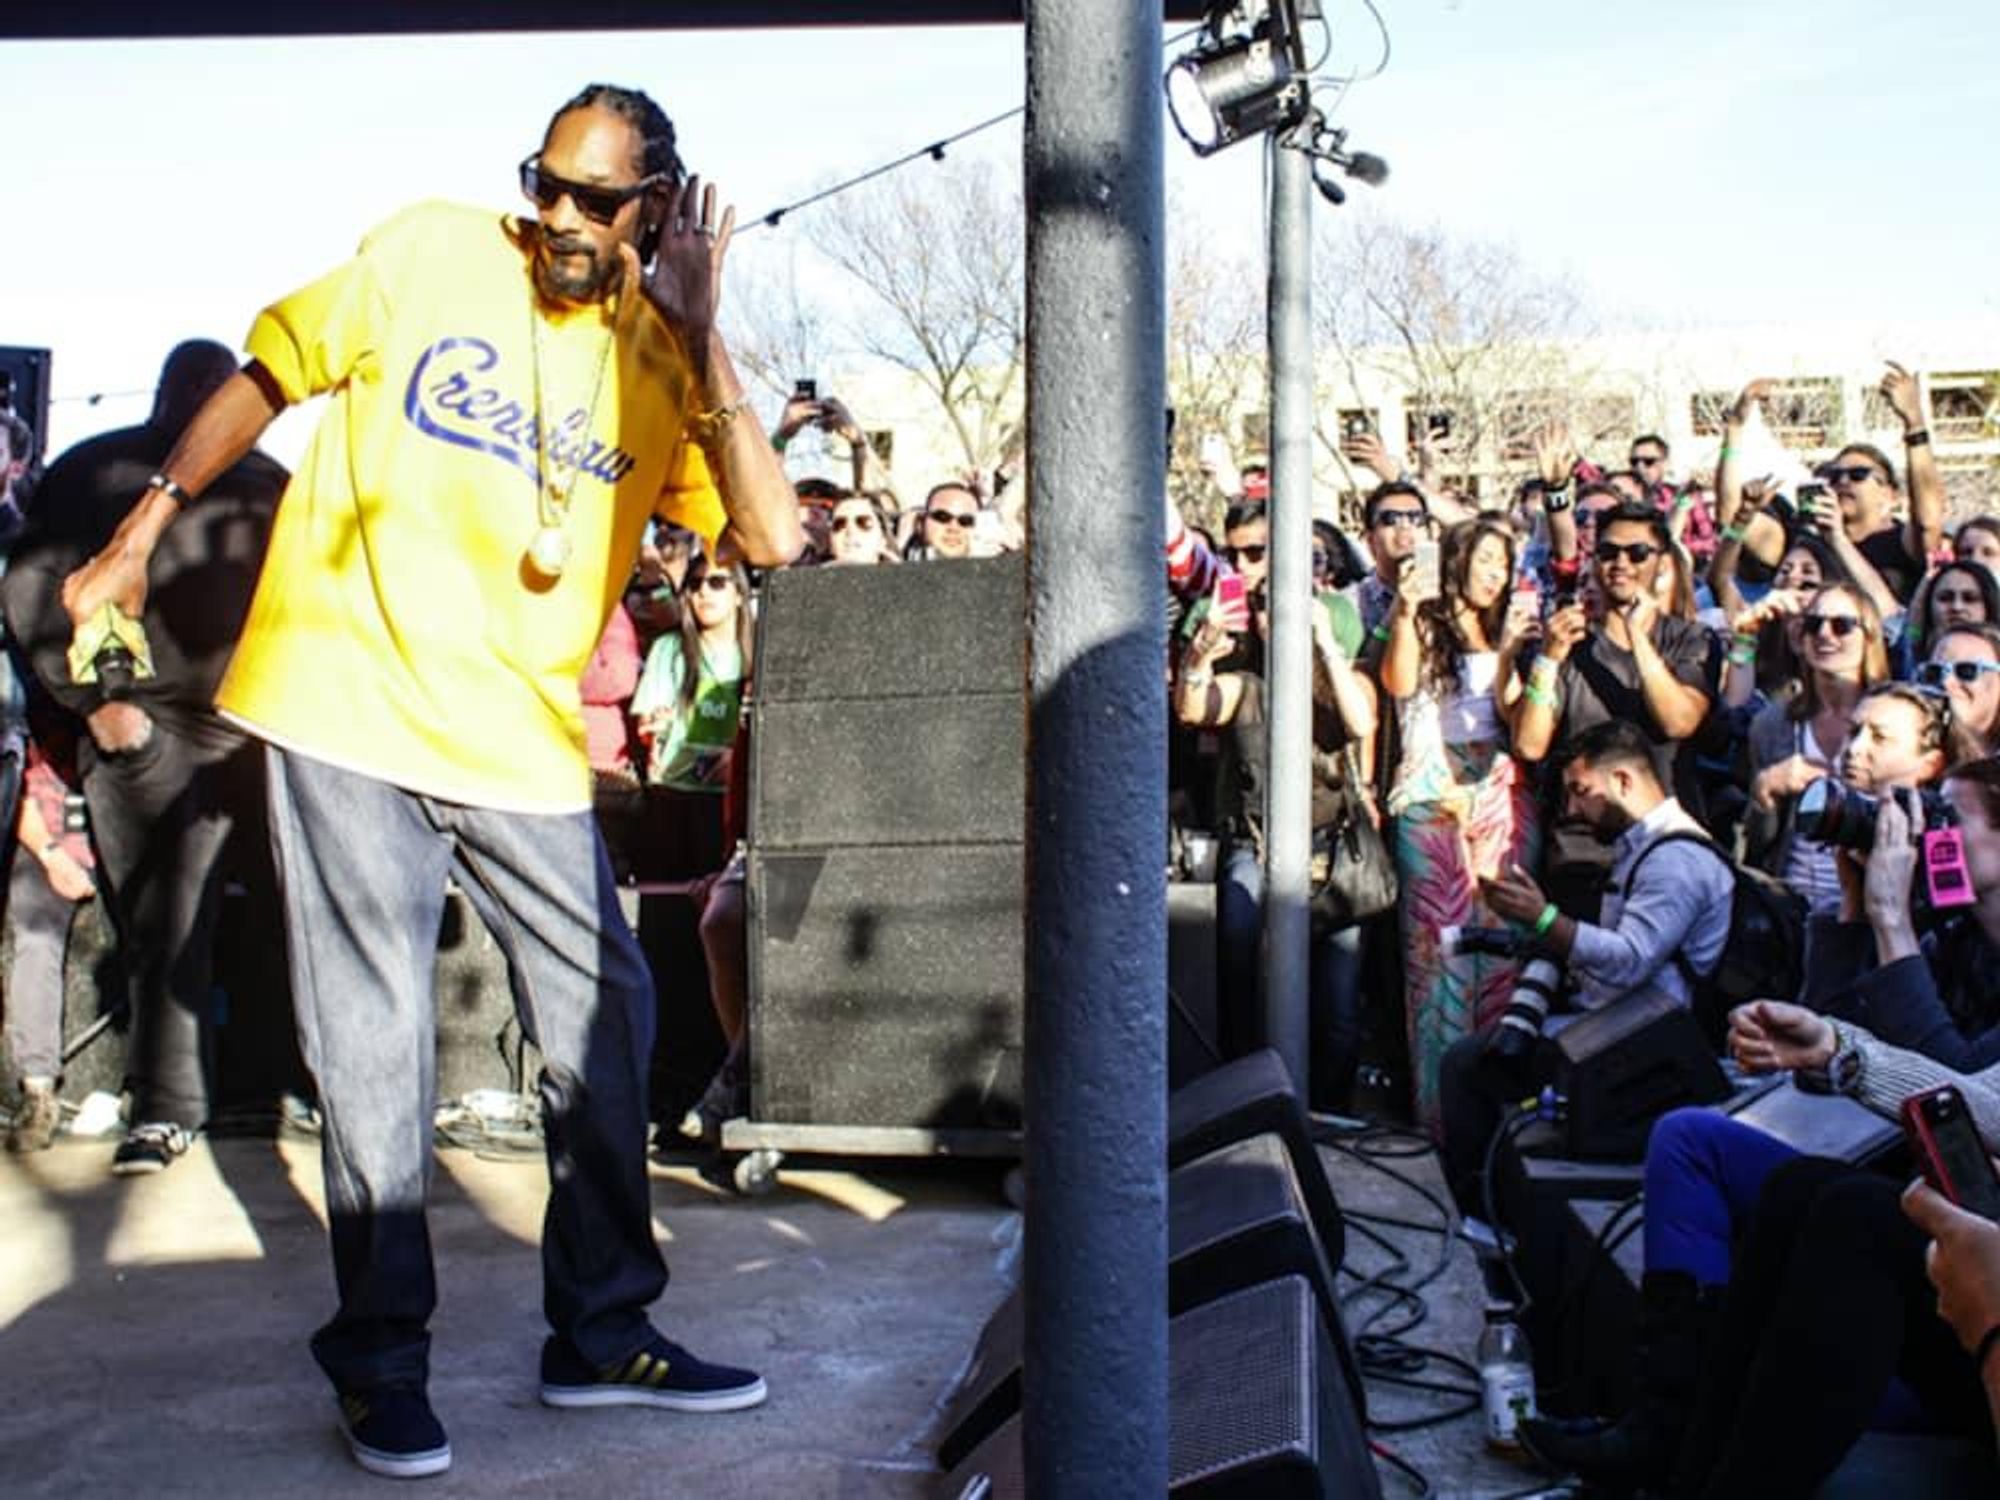 Snoop Dogg at SXSW Spotify House